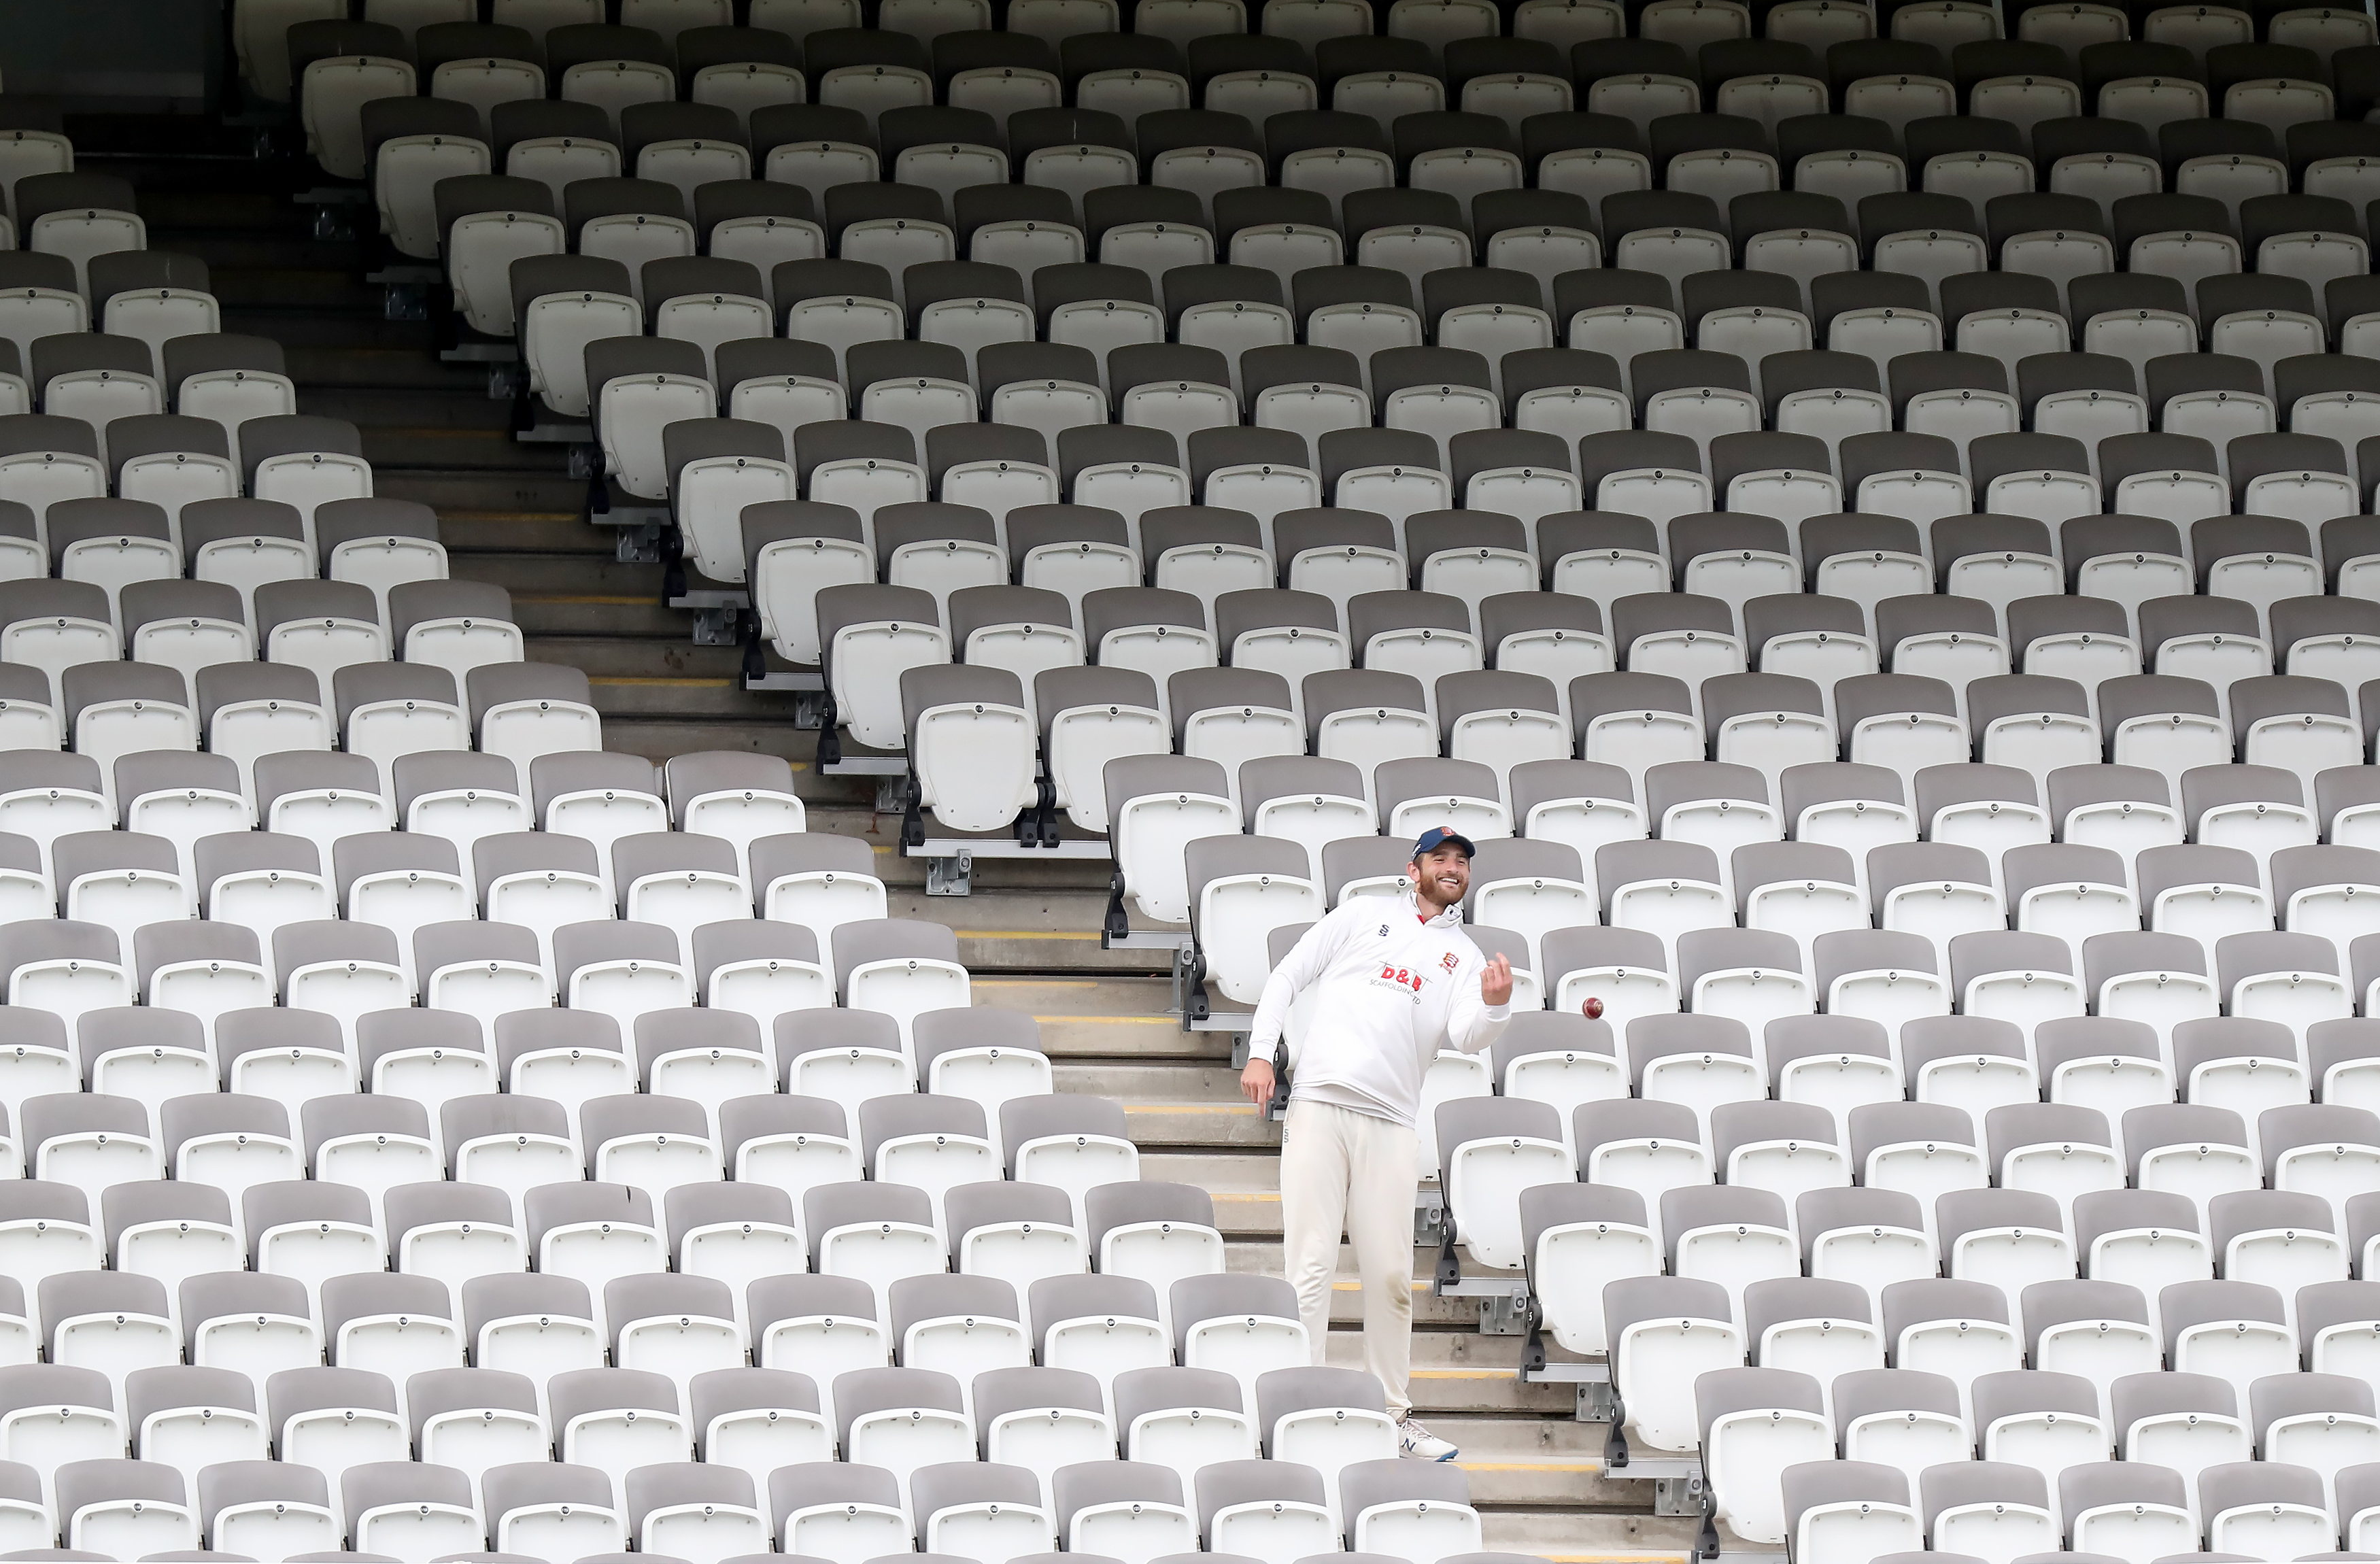 Paul Walter of Essex throws the ball back onto the field from the rows of empty seats during Somerset vs Essex in the Bob Willis Trophy Final at Lord's on 24 September.